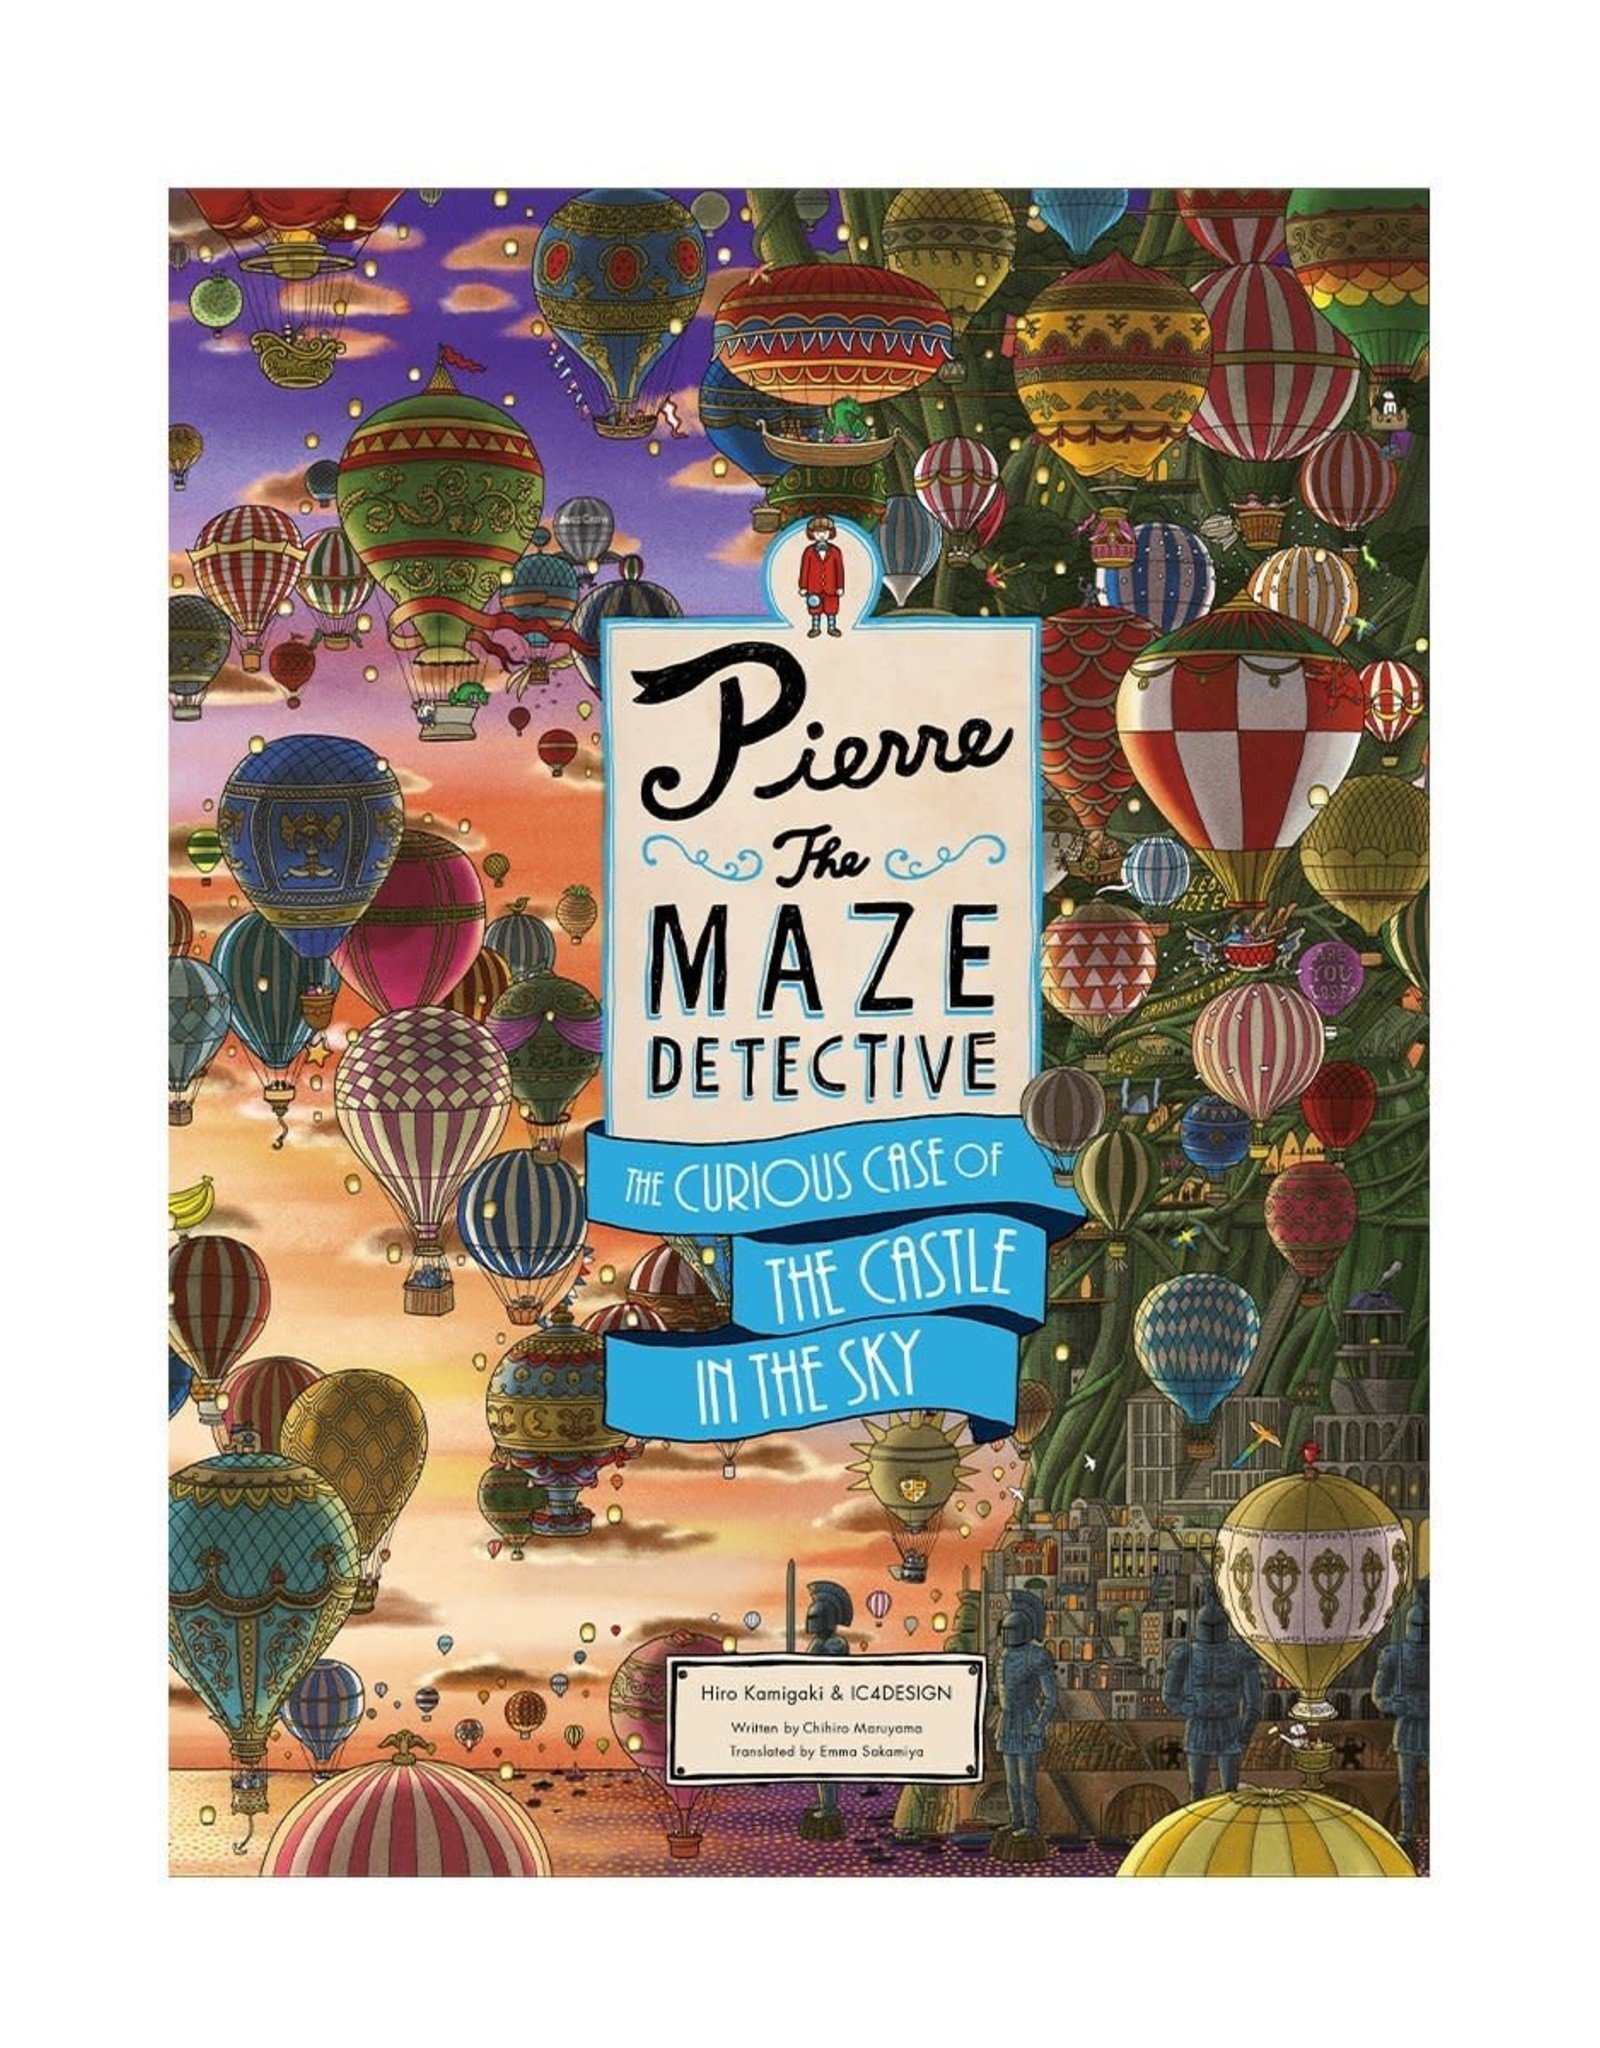 Chronicle Pierre Maze Detective: Curious Castle In the Sky